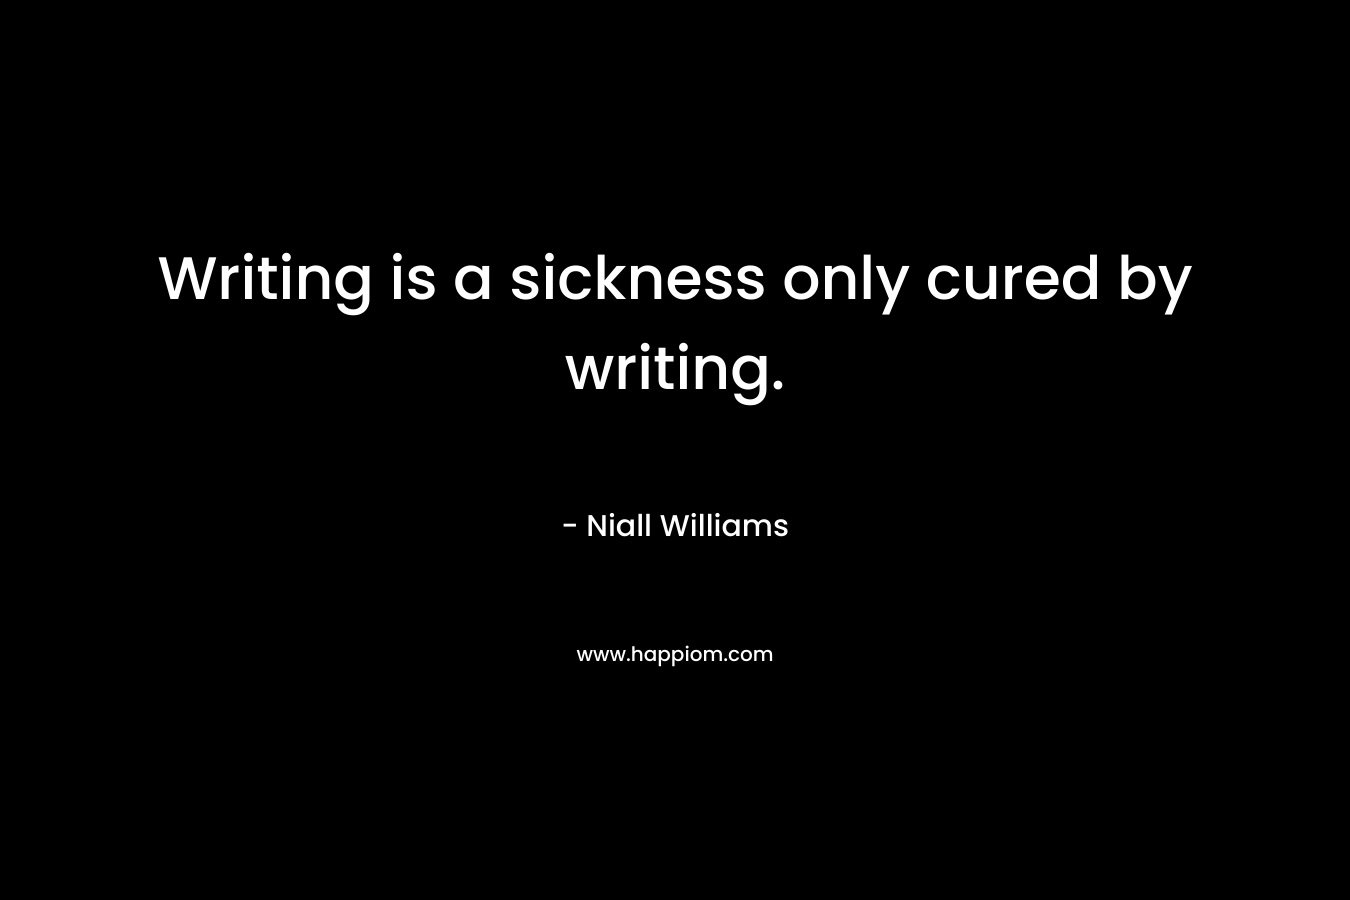 Writing is a sickness only cured by writing.